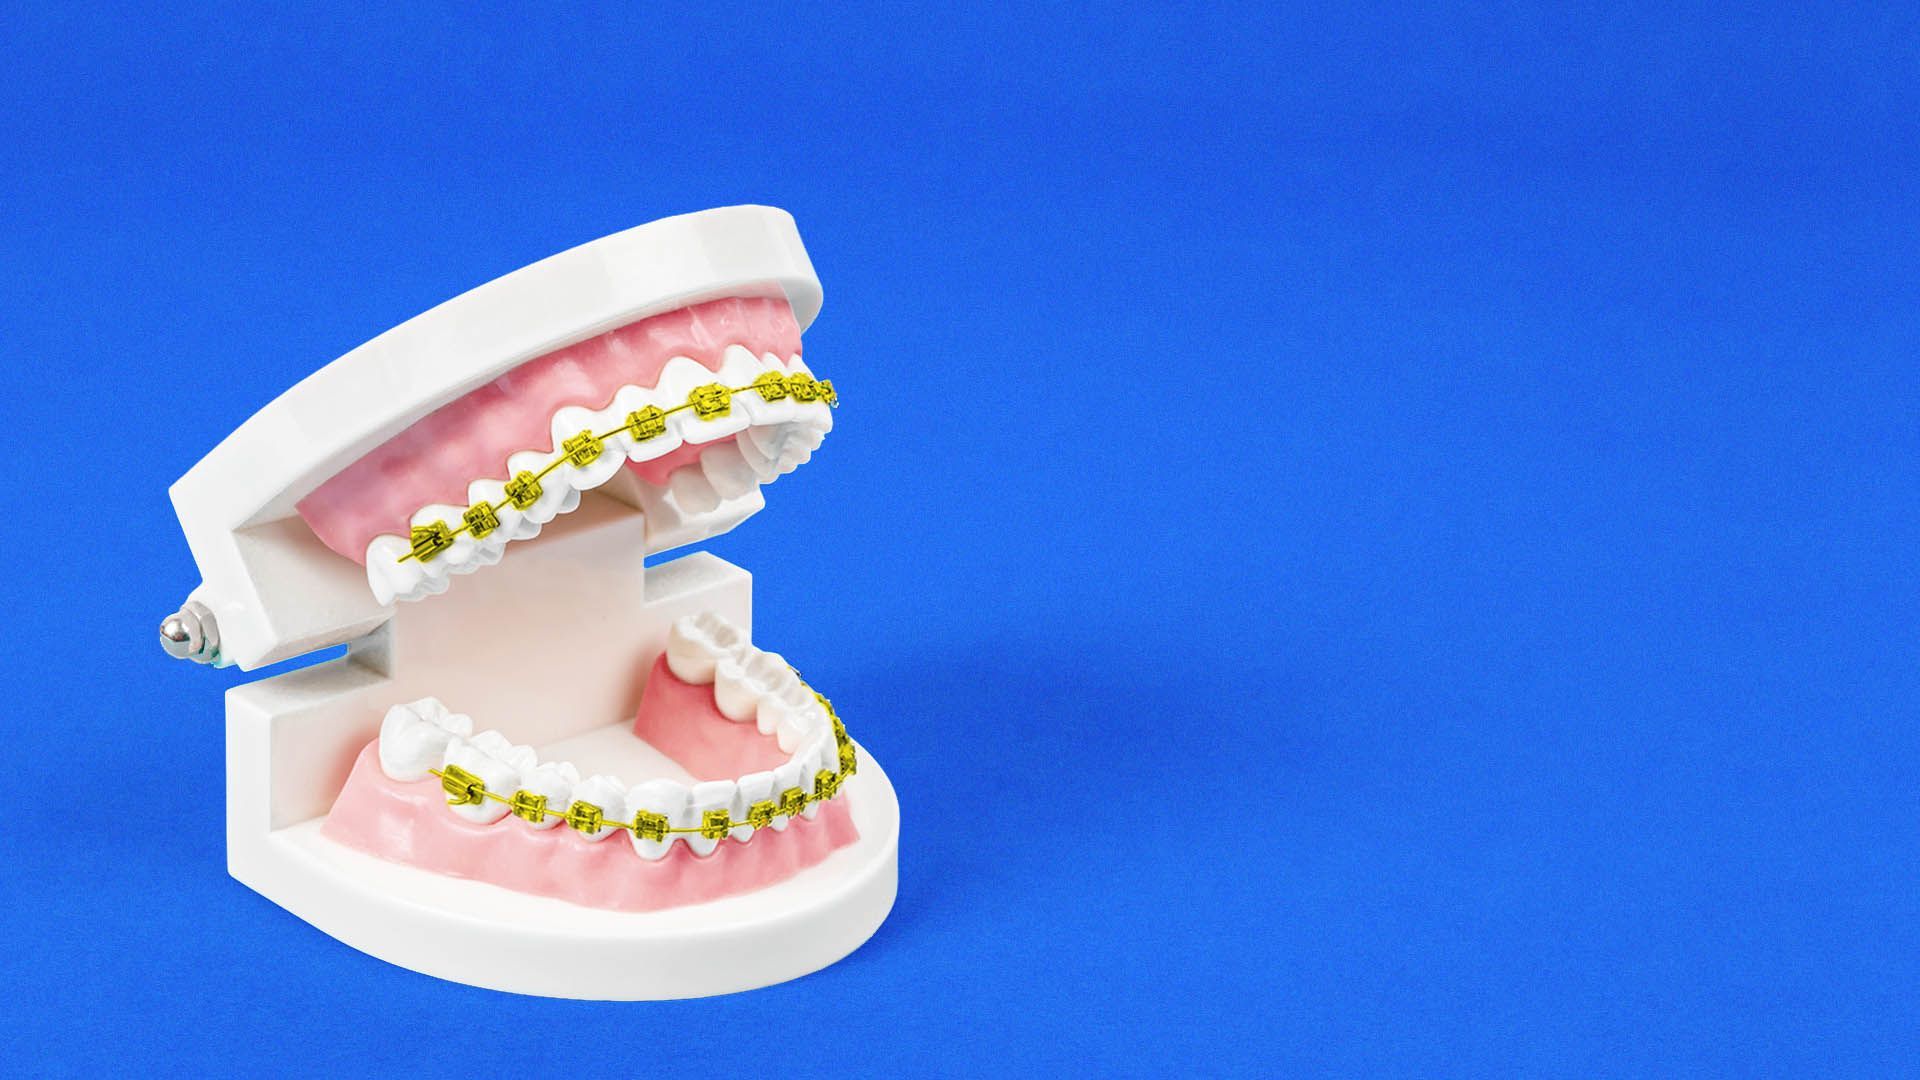 Illustration of a model of a mouth with golden braces.